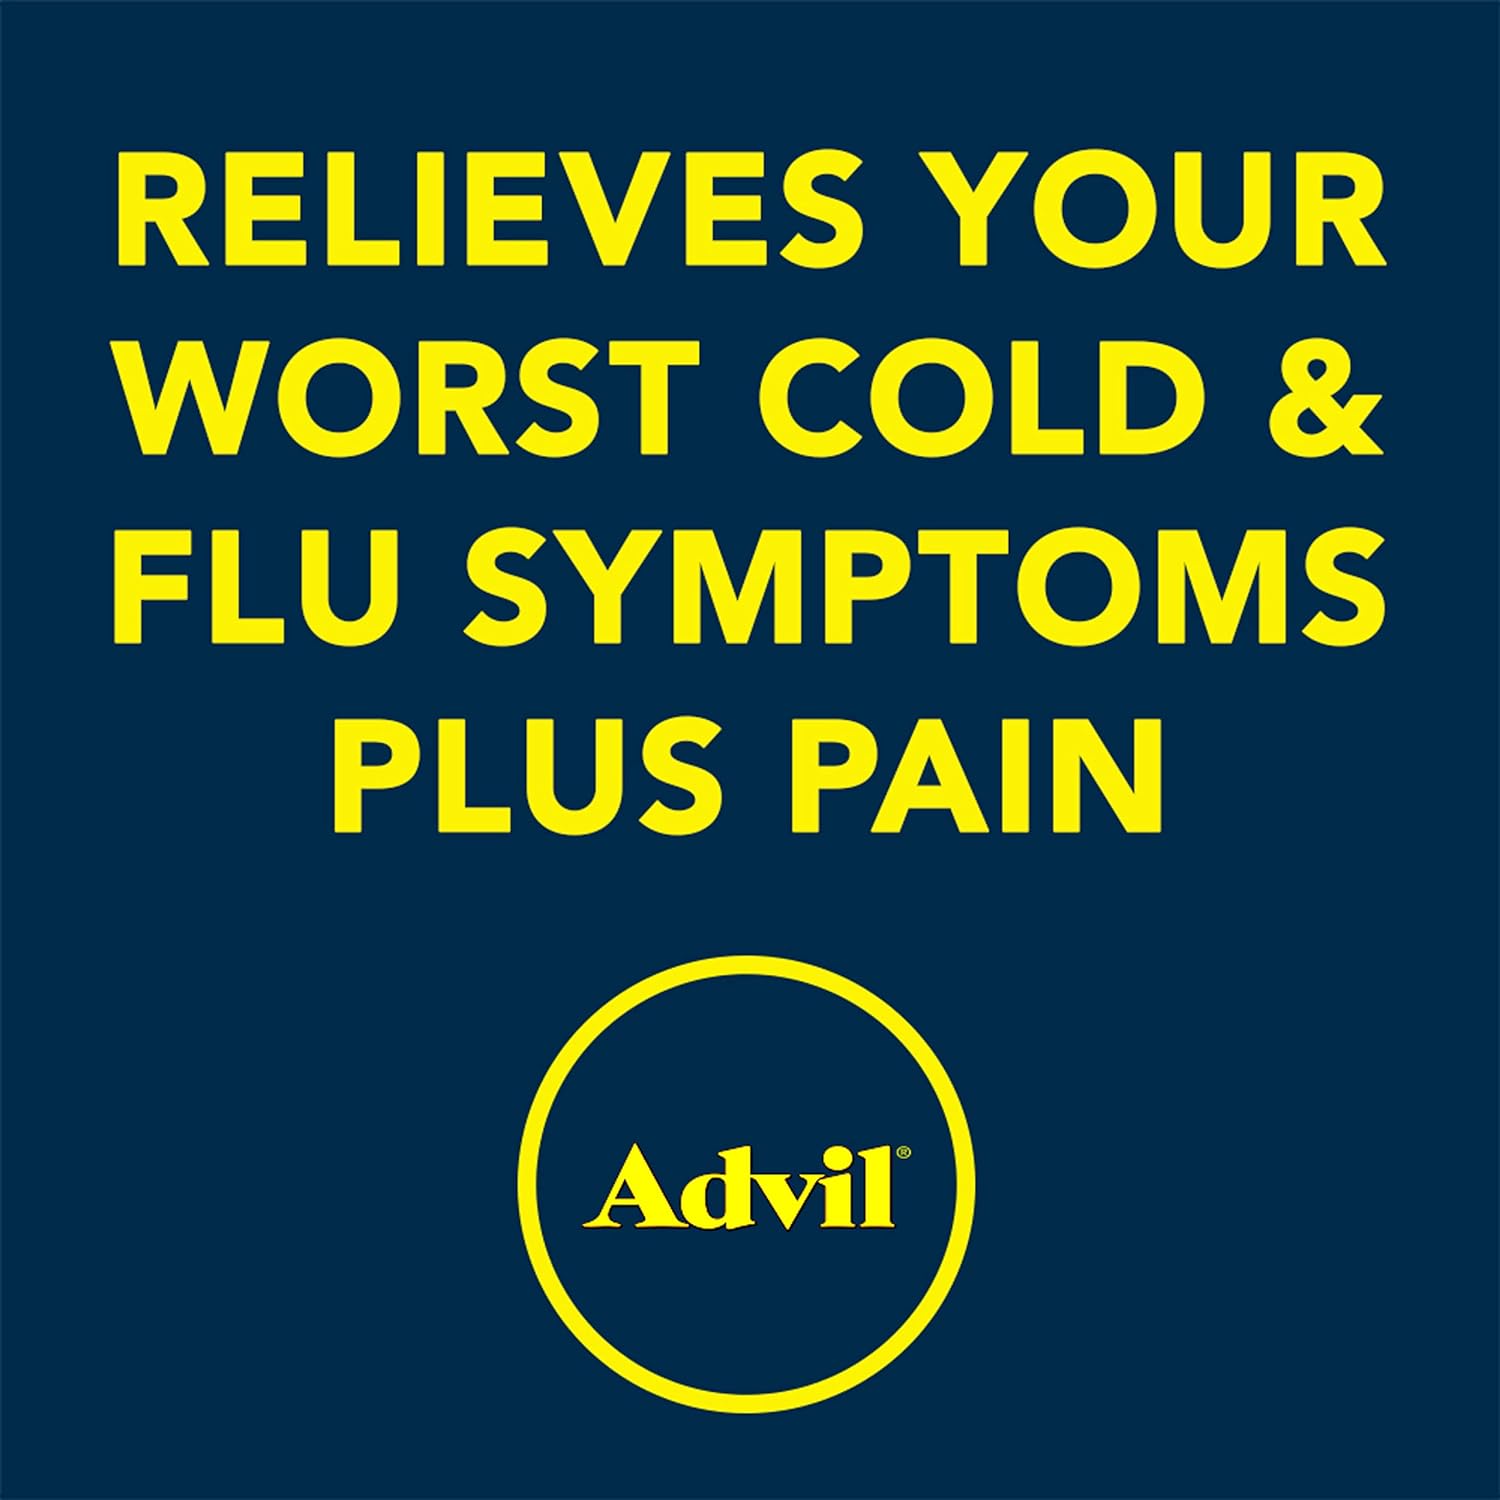 Advil Multi Symptom Cold and Flu Medicine, Cold Medicine for Adults with Ibuprofen, Phenylephrine HCL and Chlorpheniramine Maleate - 50 Coated Tablets : Health & Household